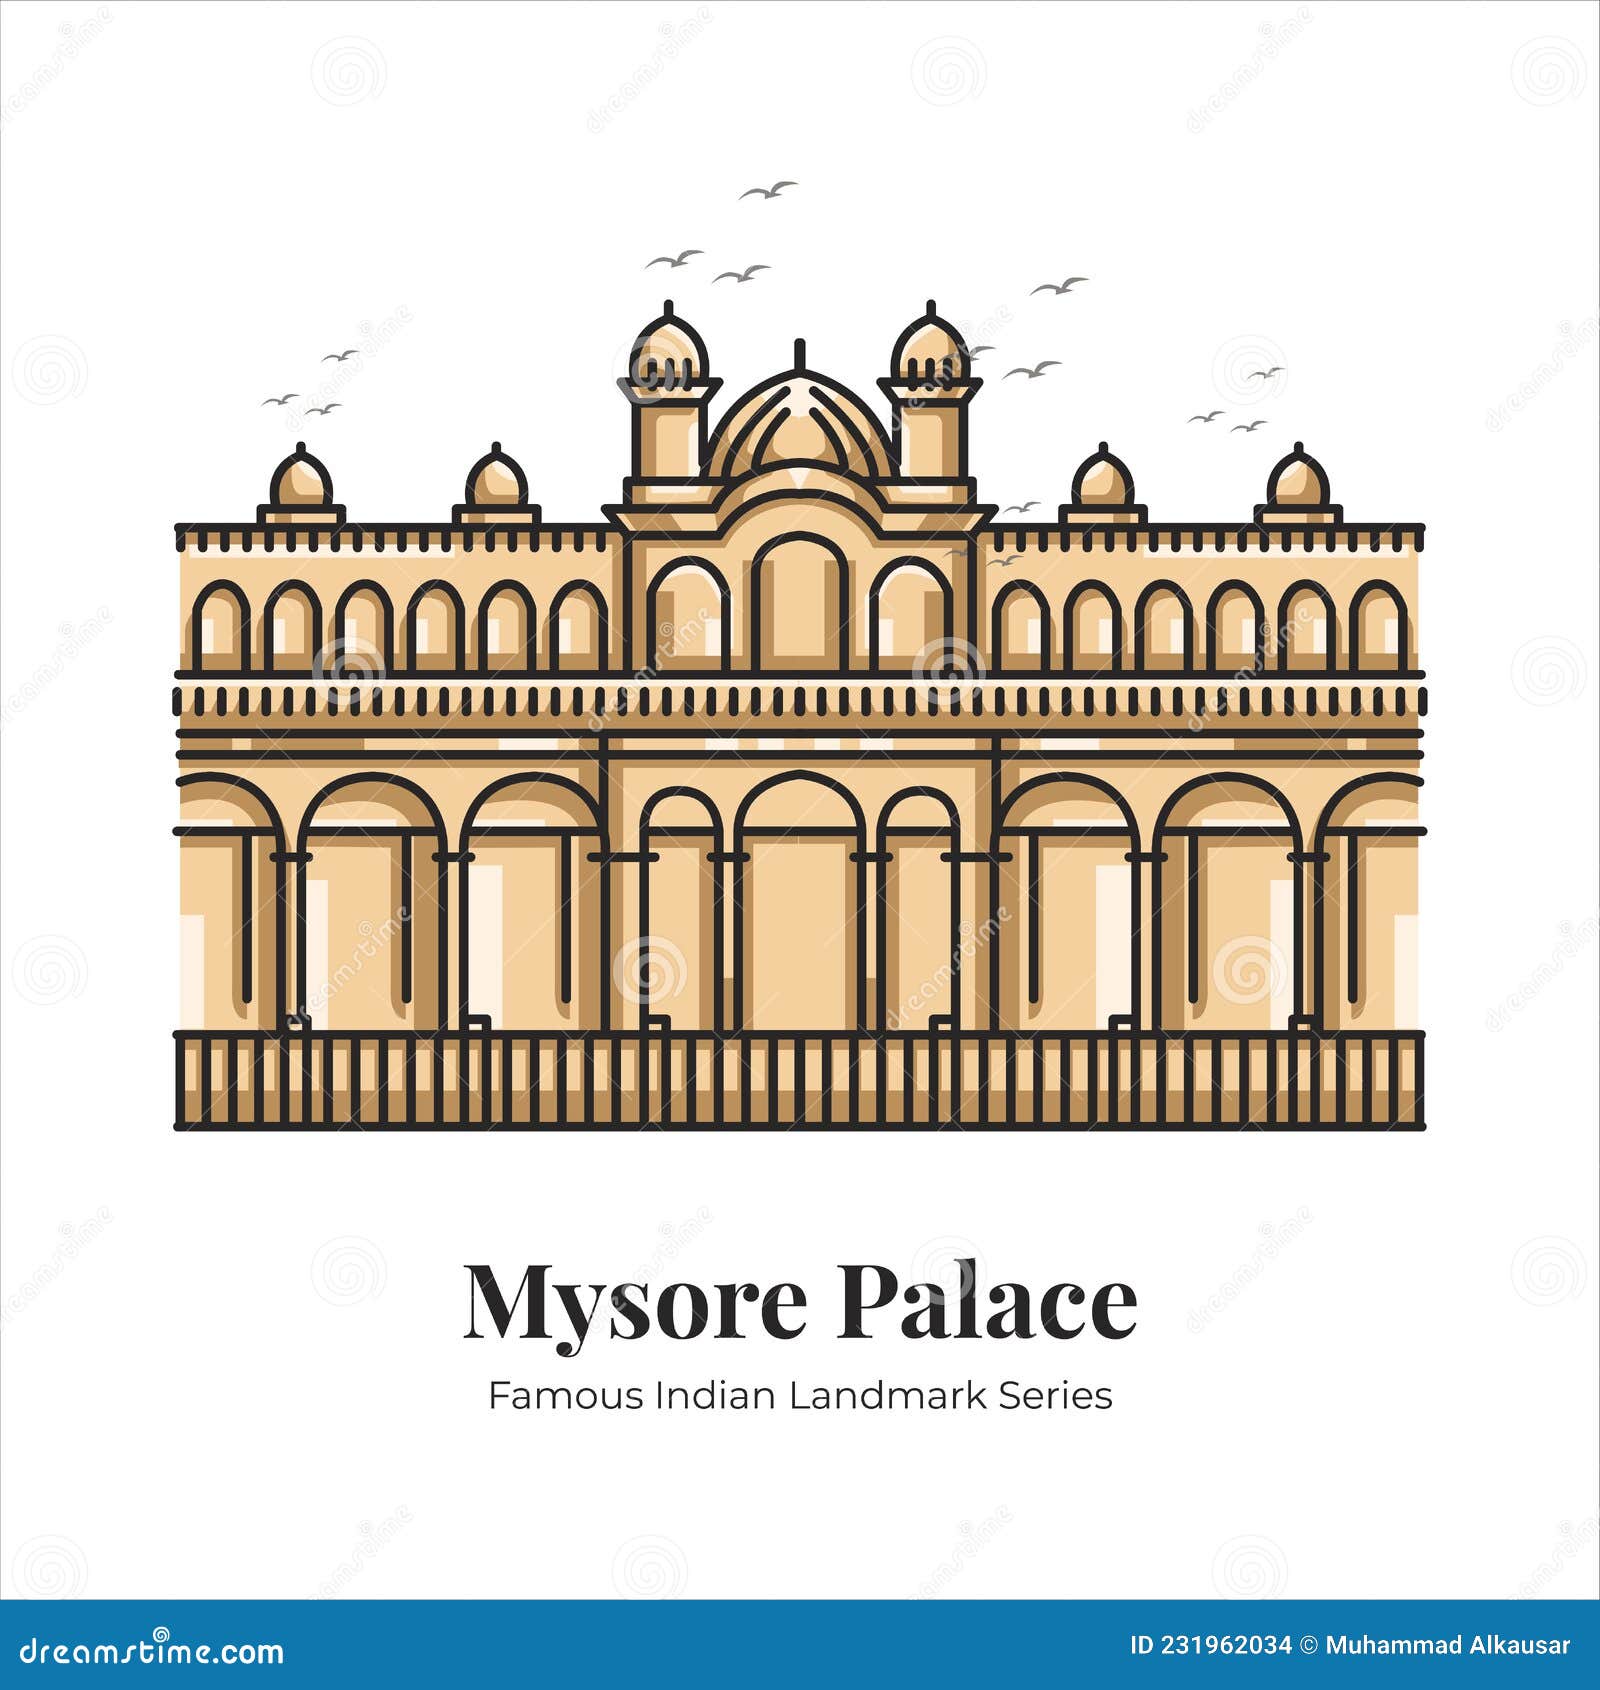 Mysore Center: Over 110 Royalty-Free Licensable Stock Illustrations &  Drawings | Shutterstock